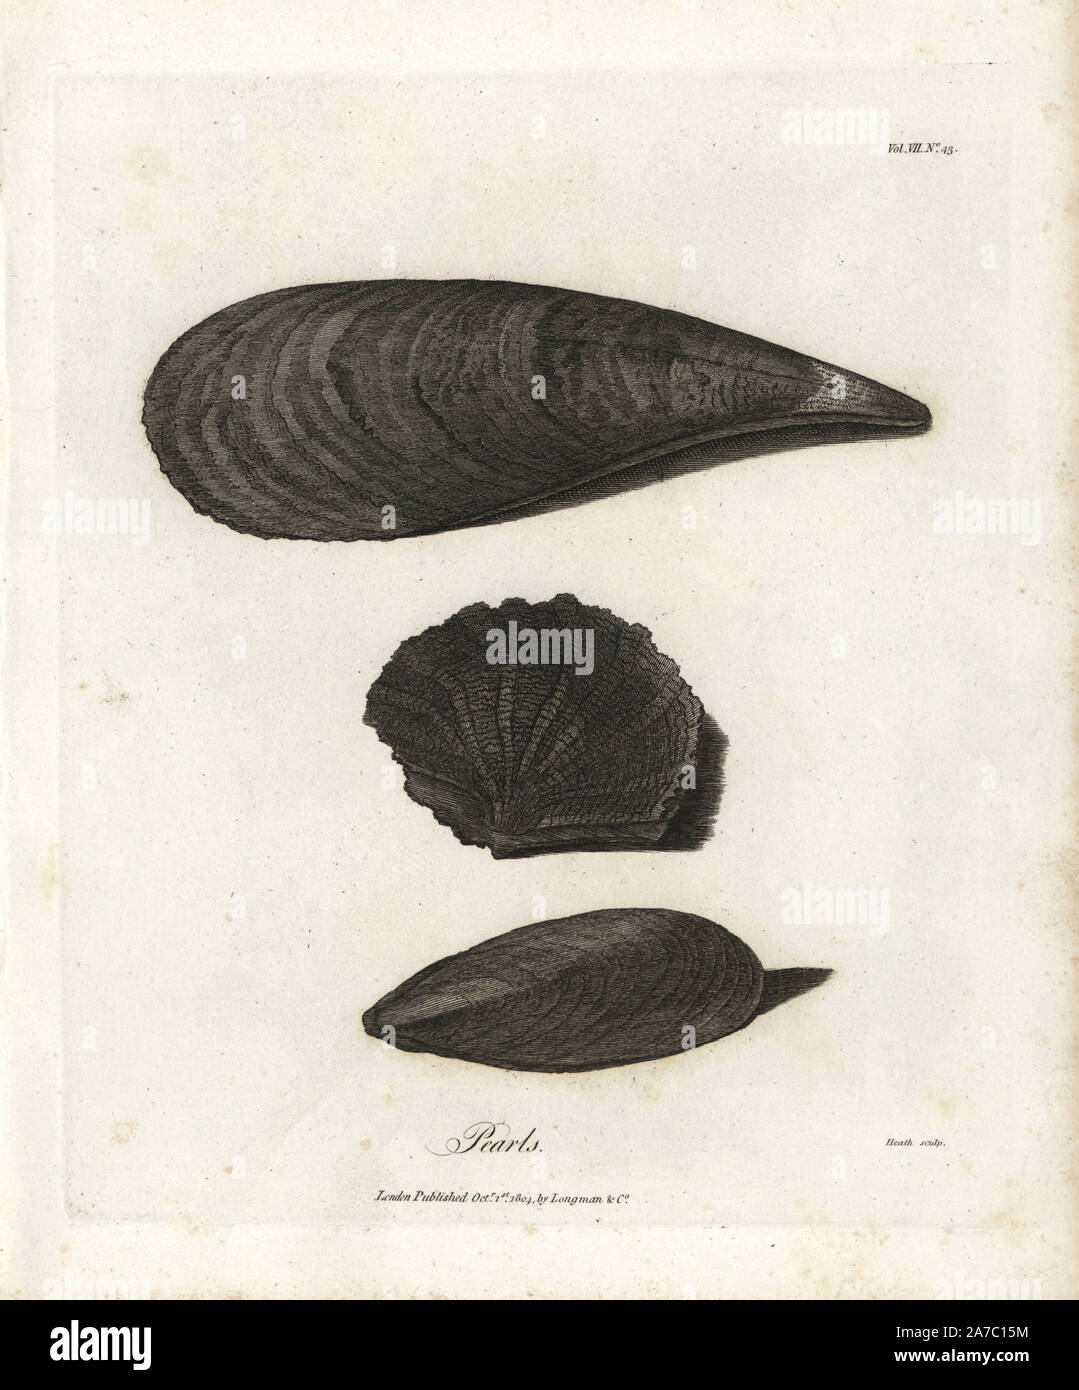 Pearl shells from the Red Sea: mussel, pinna, and oyster. Copperplate engraving from James Bruce's 'Travels to Discover the Source of the Nile, in the years 1768, 1769, 1770, 1771, 1772 and 1773,' London, 1790. James Bruce (1730-1794) was a Scottish explorer and travel writer who spent more than 12 years in North Africa and Ethiopia. Engraved by Heath after an original drawing by Bruce. Stock Photo